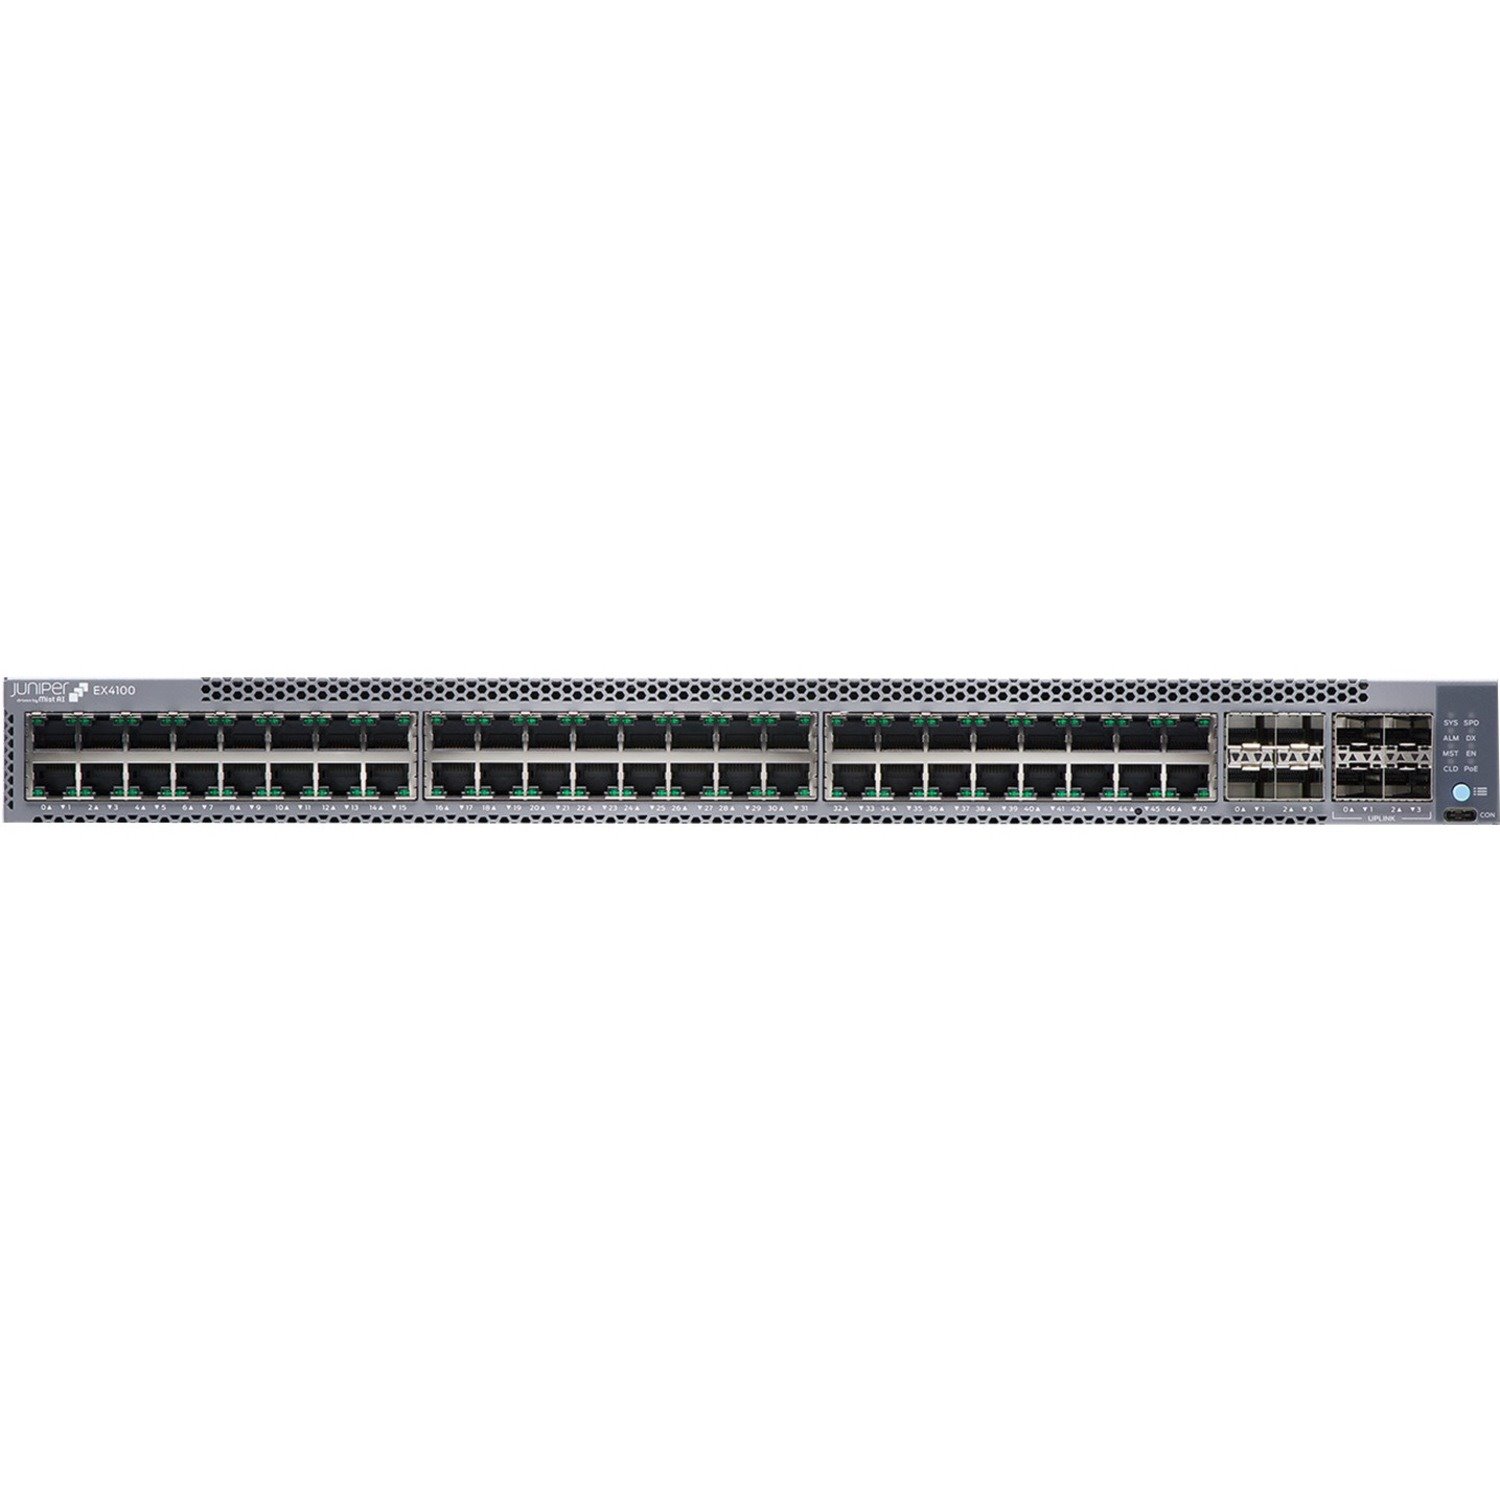 Juniper EX4100 EX4100-48T-AFI 48 Ports Manageable Ethernet Switch - 10 Gigabit Ethernet, Gigabit Ethernet, 25 Gigabit Ethernet - 10/100/1000Base-T, 10GBase-X, 25GBase-X - TAA Compliant